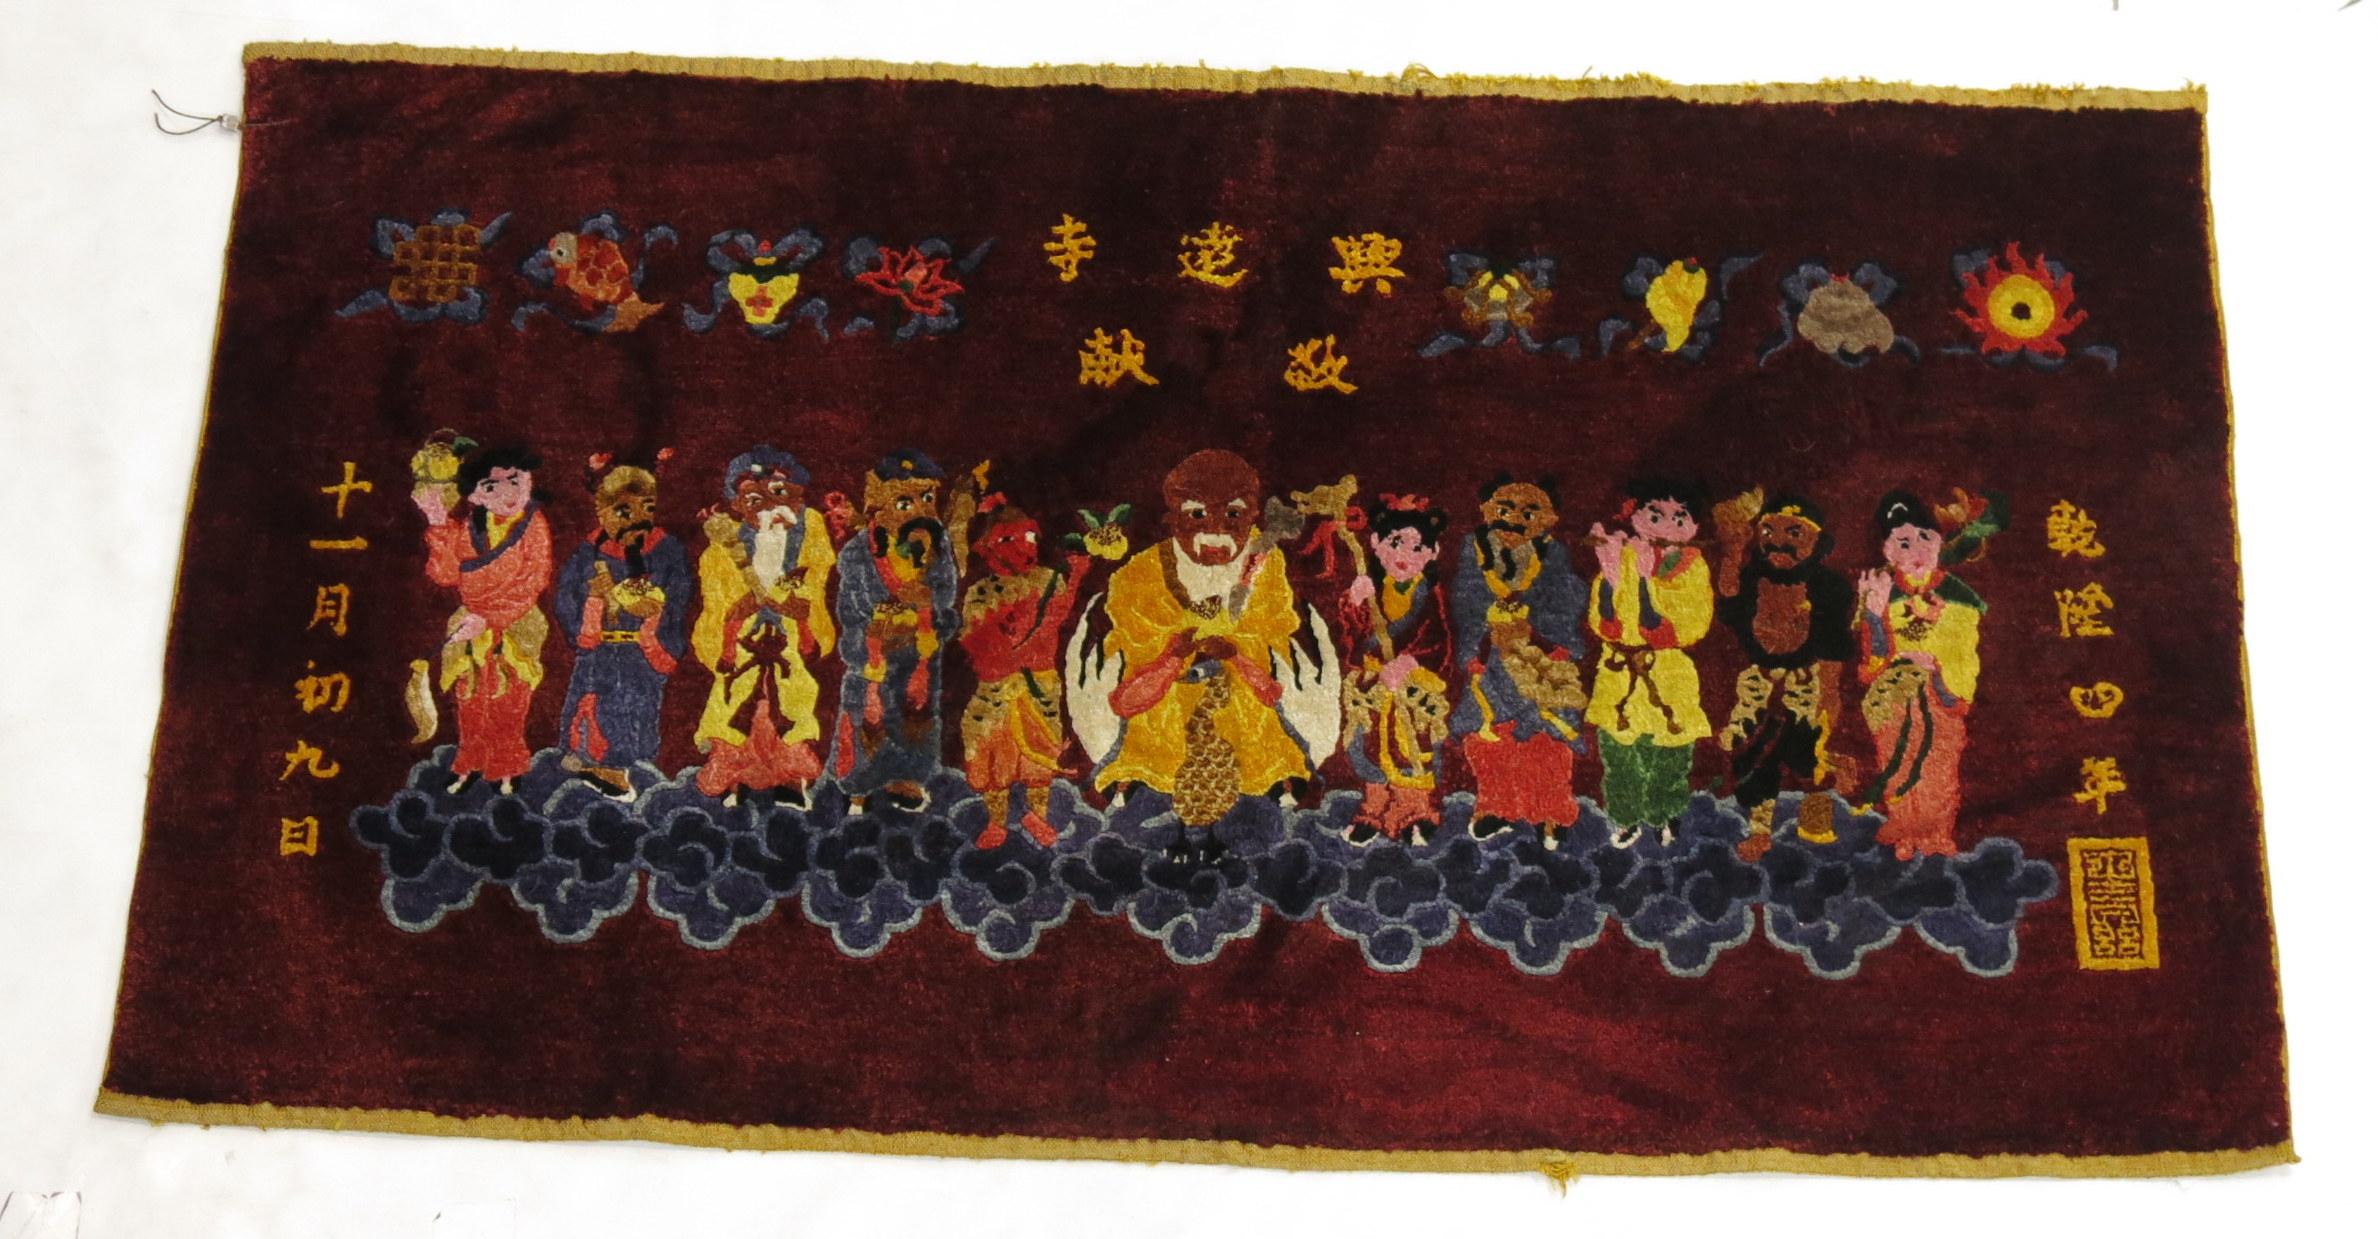 A Chinese silk pictorial rug. On a border-less burgundy red ground, 11 Immortals stand on clouds .Each immortal has its own unique colorful outfit or costume. The calligraphy most likely shows that it was woven somewhere in Beijing although we are